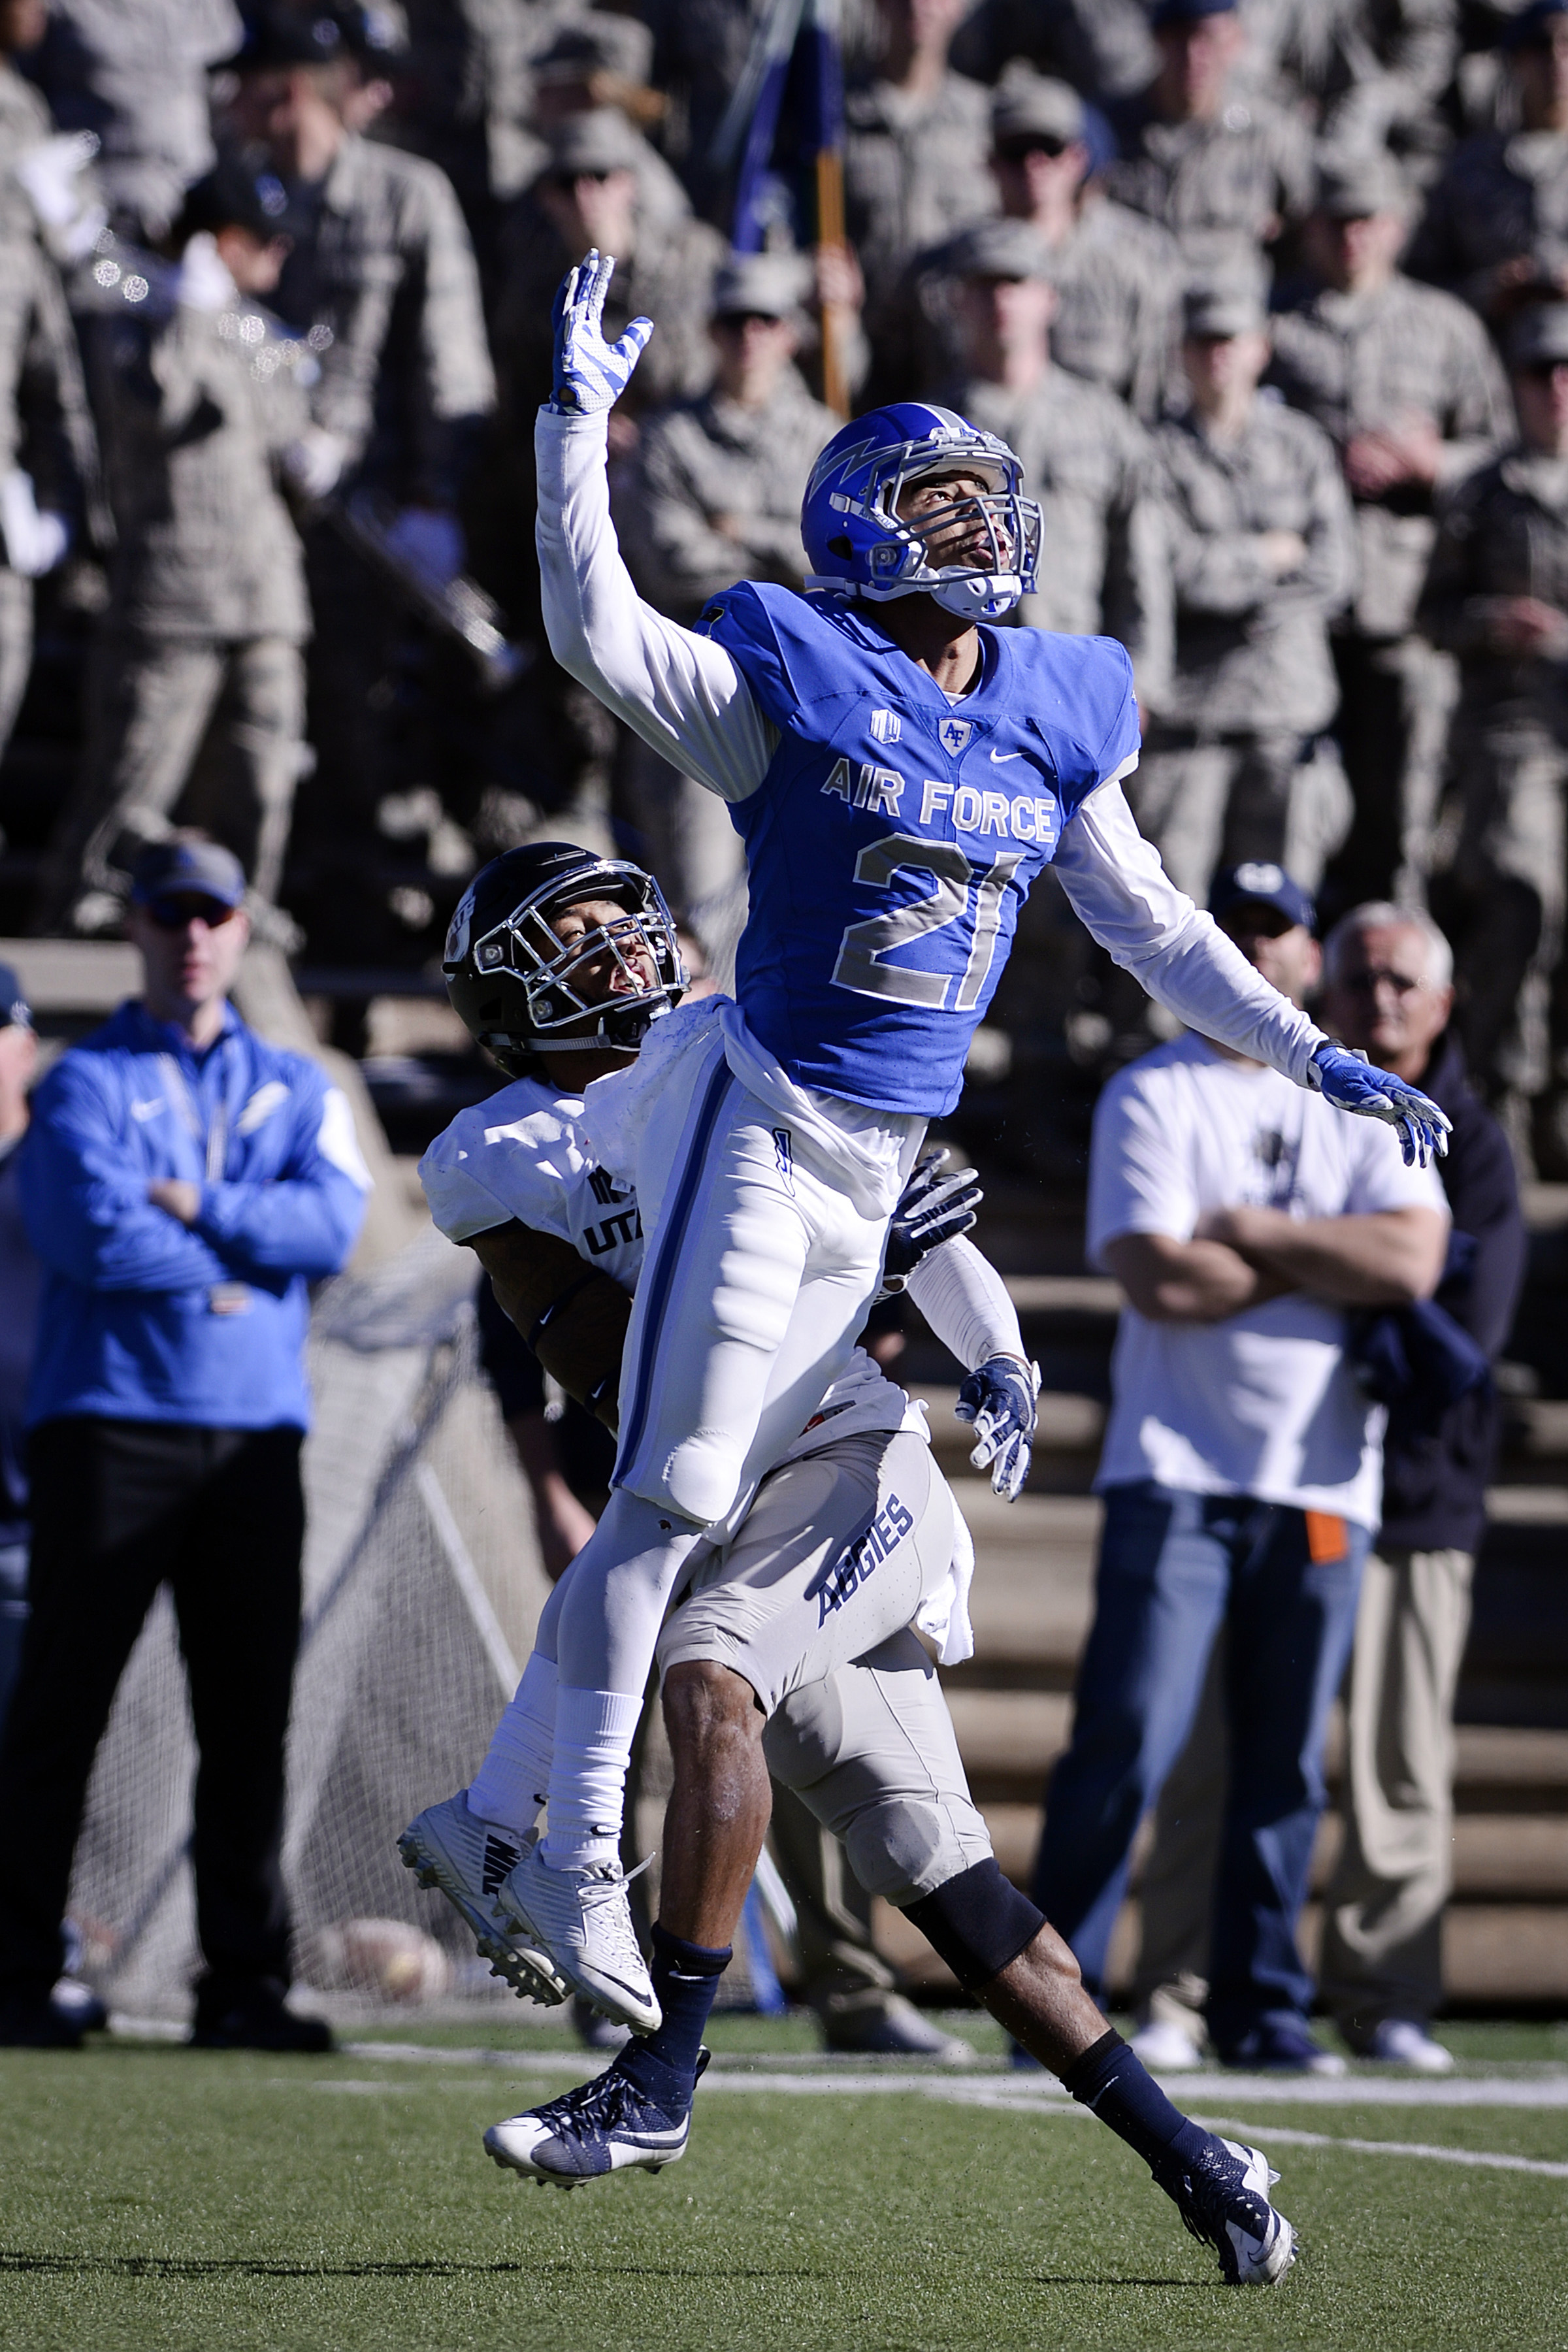 Air Force earns spot in Mountain West championship game > United States